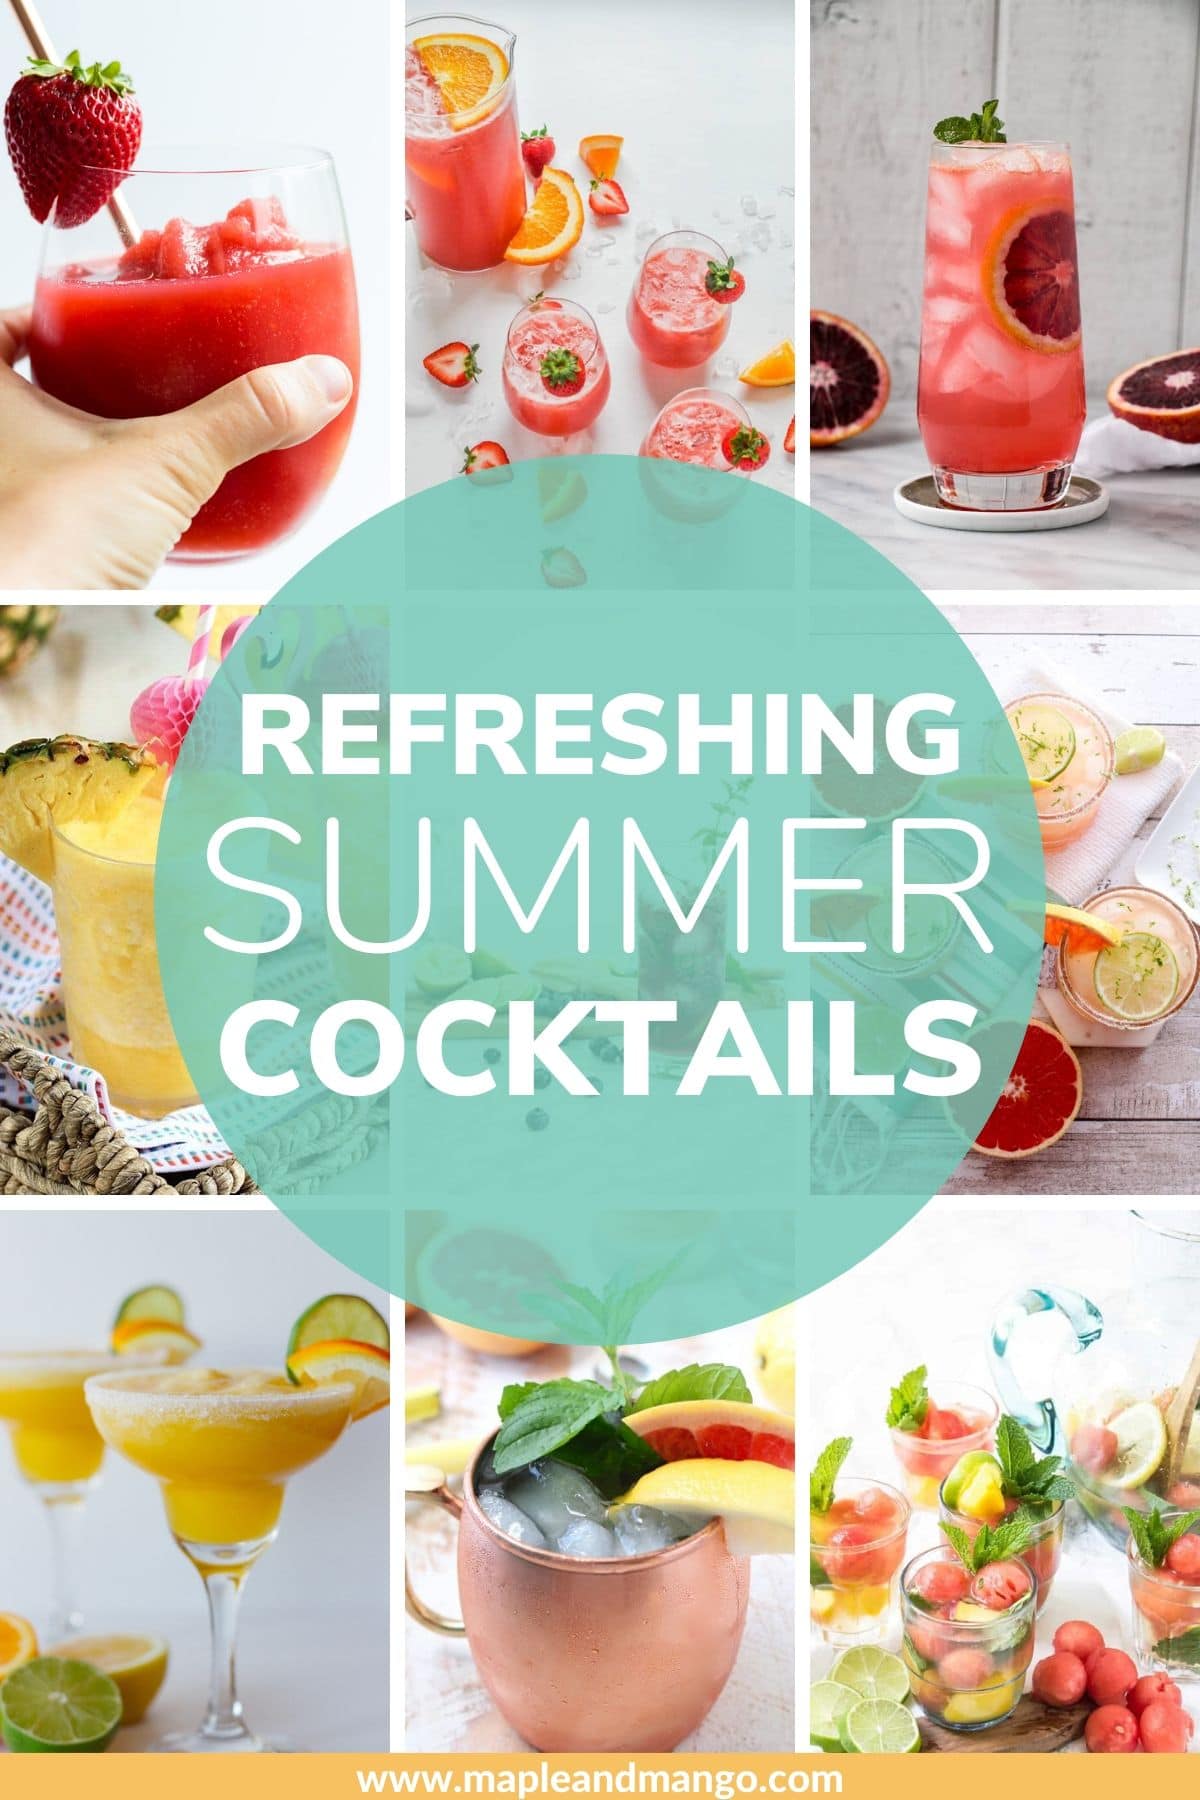 Collage of cocktail photos with text overlay "Refreshing Summer Cocktails"